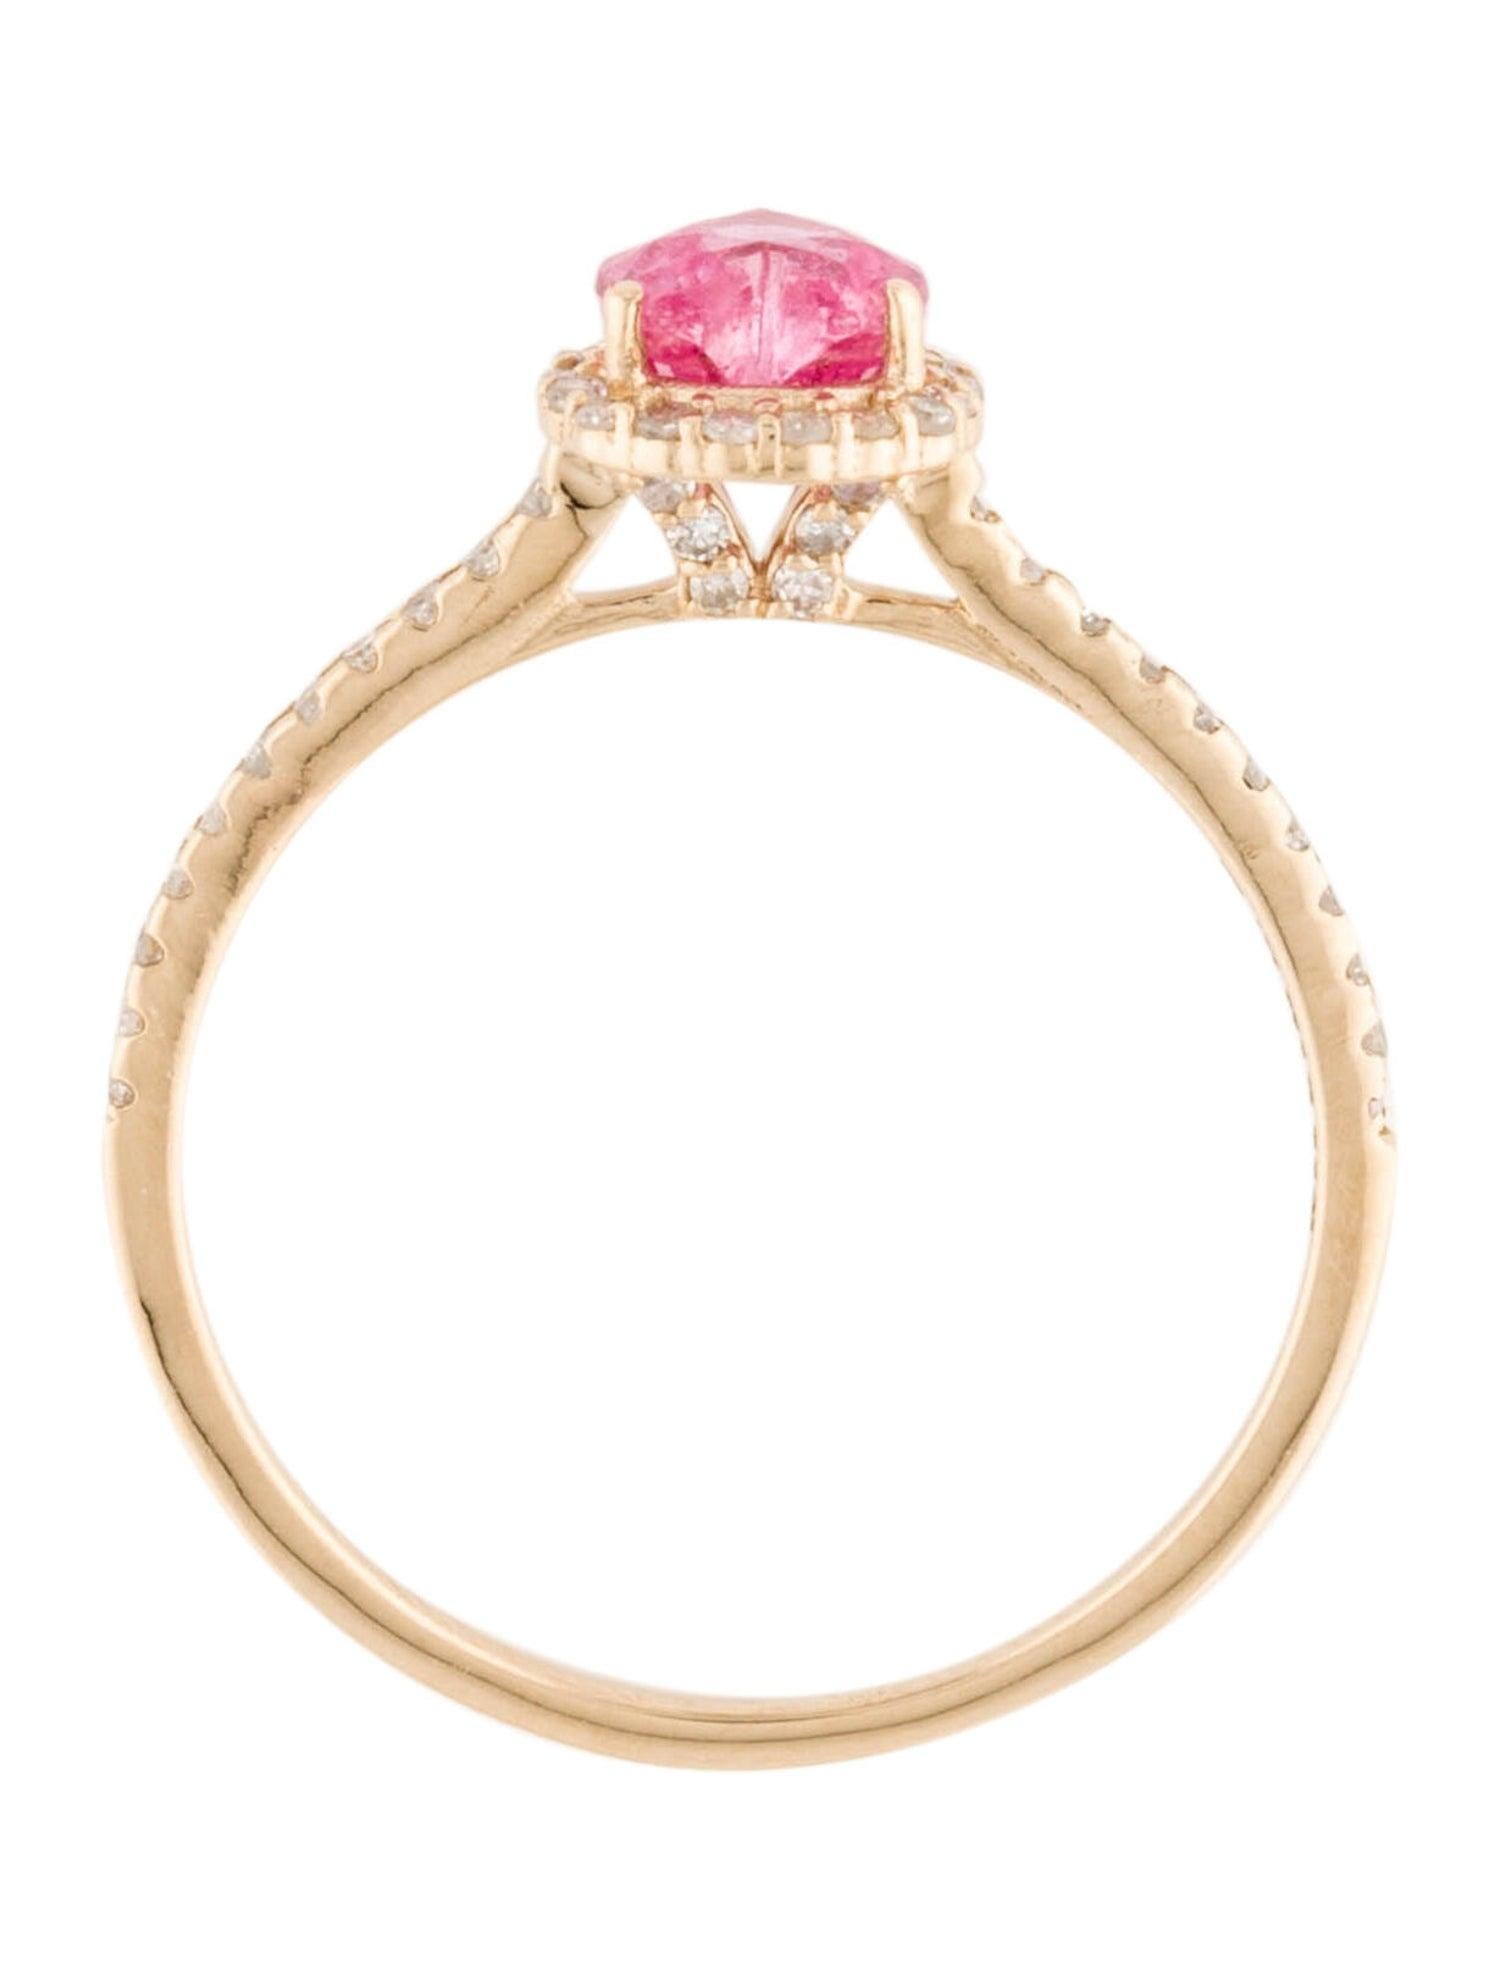 Gorgeous 14K Pink Sapphire & Diamond Cocktail Ring - Size 7  Elegant Jewelry In New Condition For Sale In Holtsville, NY